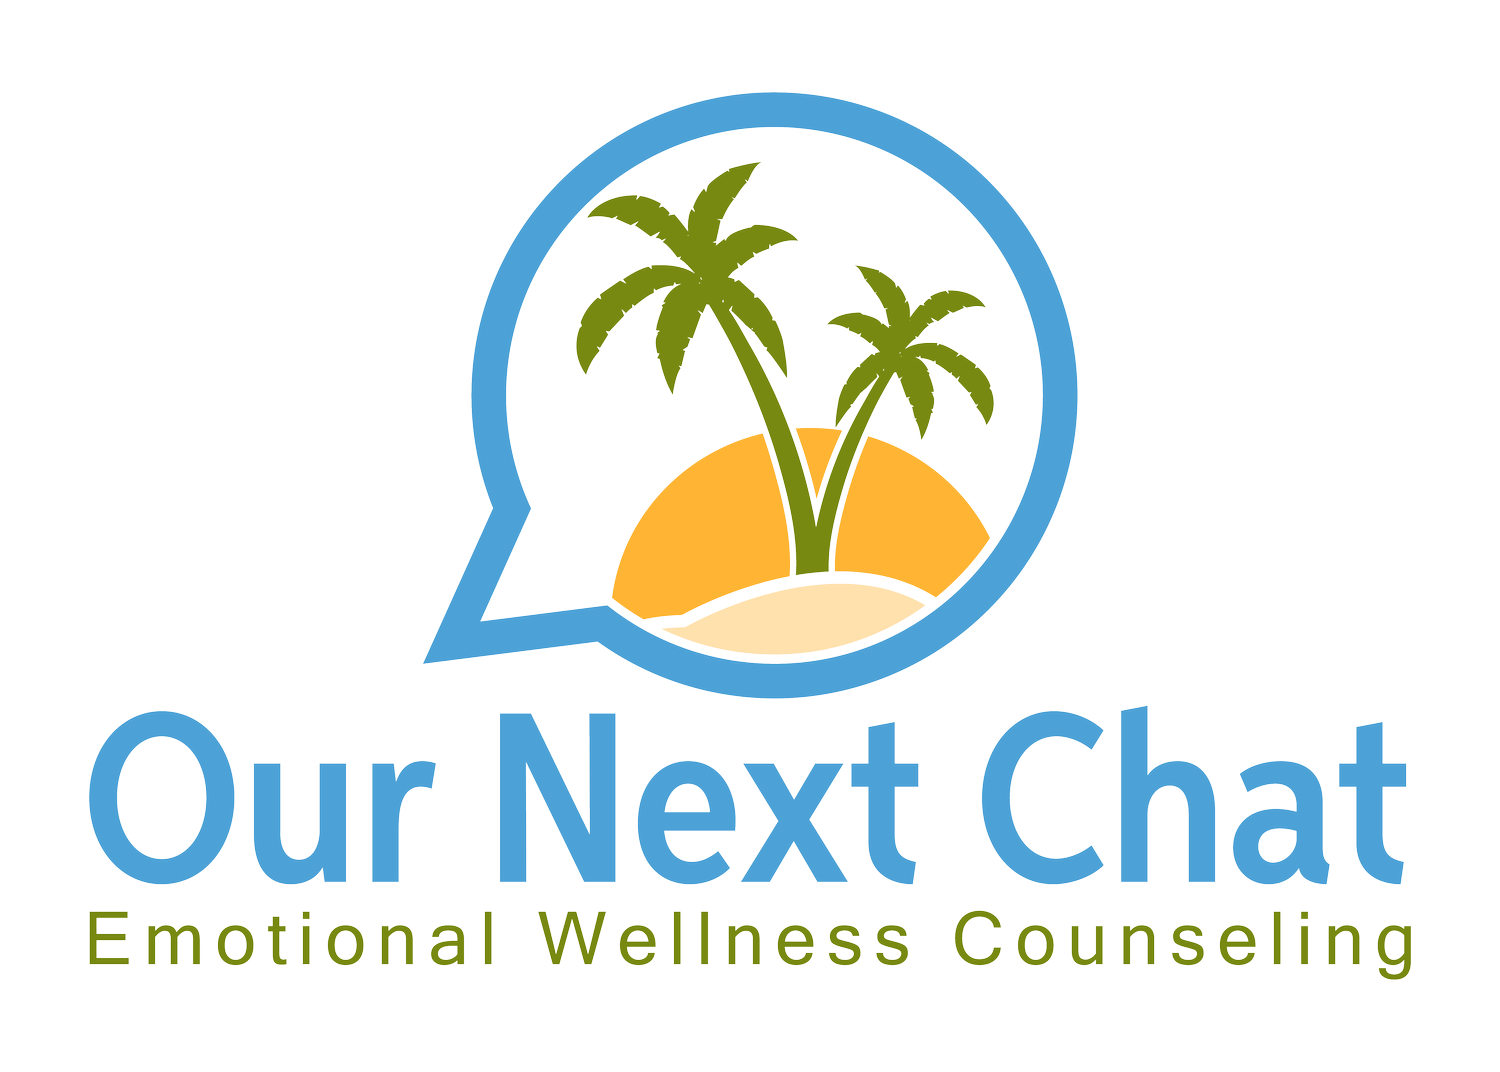 Our Next Chat - Emotional Wellness Counseling